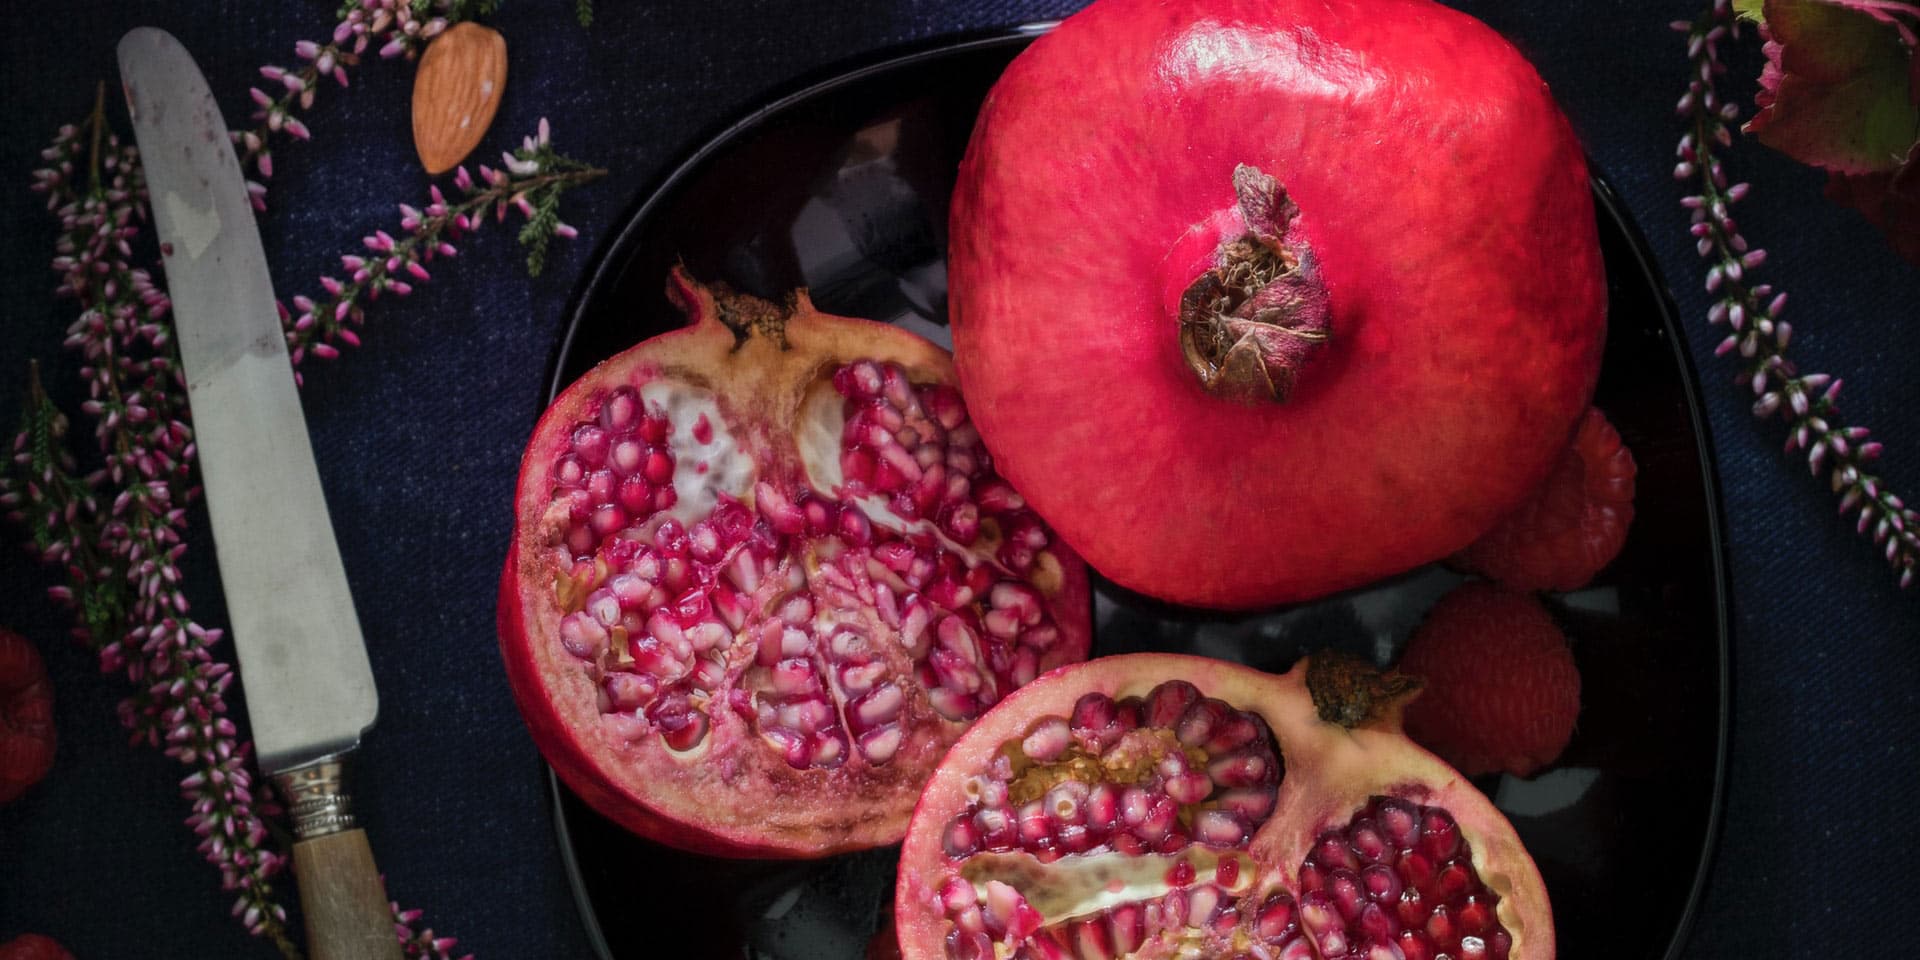 A whole and partially sliced pomegranate on a dark plate with a rustic knife to the side, surrounded by a sprinkling of almonds and hints of purple flowers, all set against a dark,